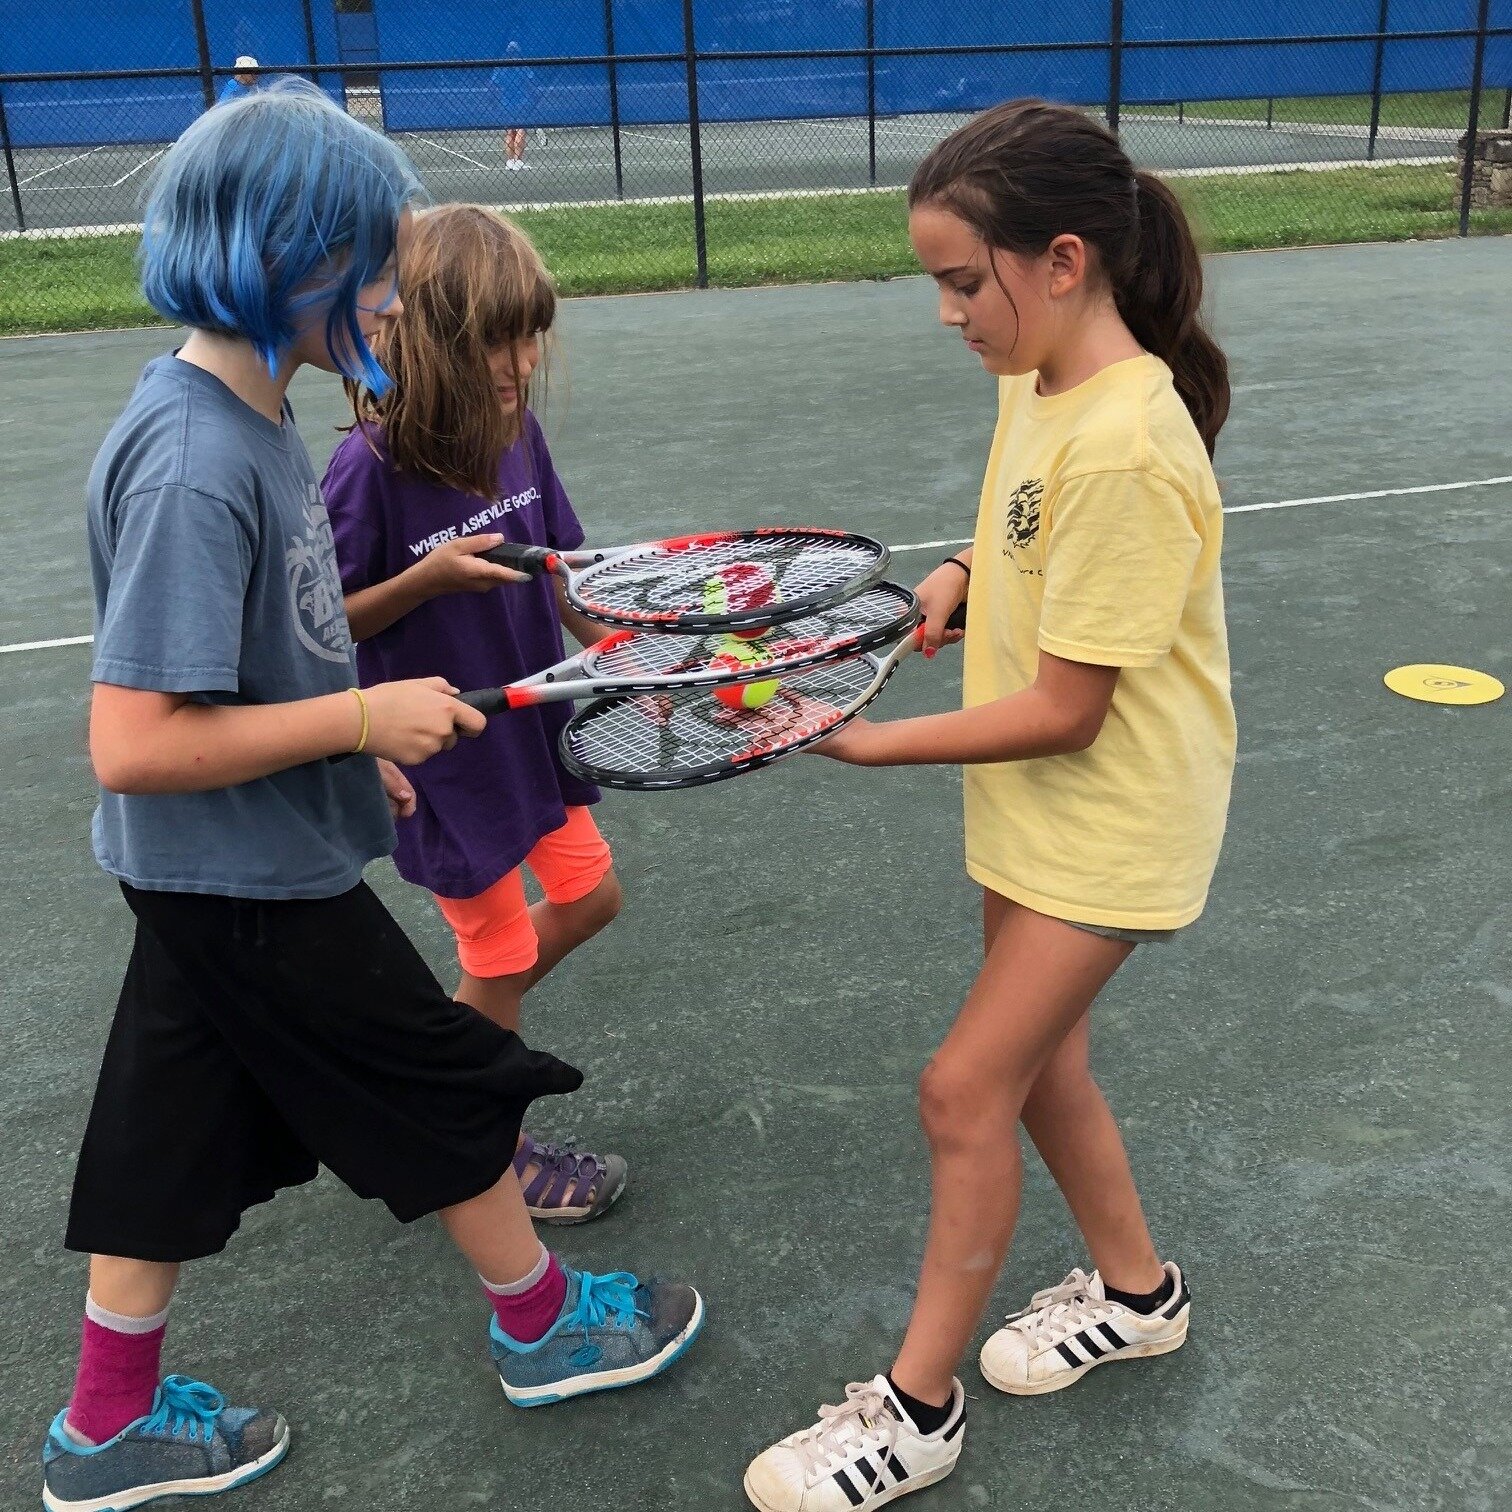 Summer kids' clinics start up in June around the county at Oakley, Erwin, N Buncombe, and TC Roberson. 🙌🎾 Keep your kids moving this summer, sign up here: https://www.avltennis.com/juniors